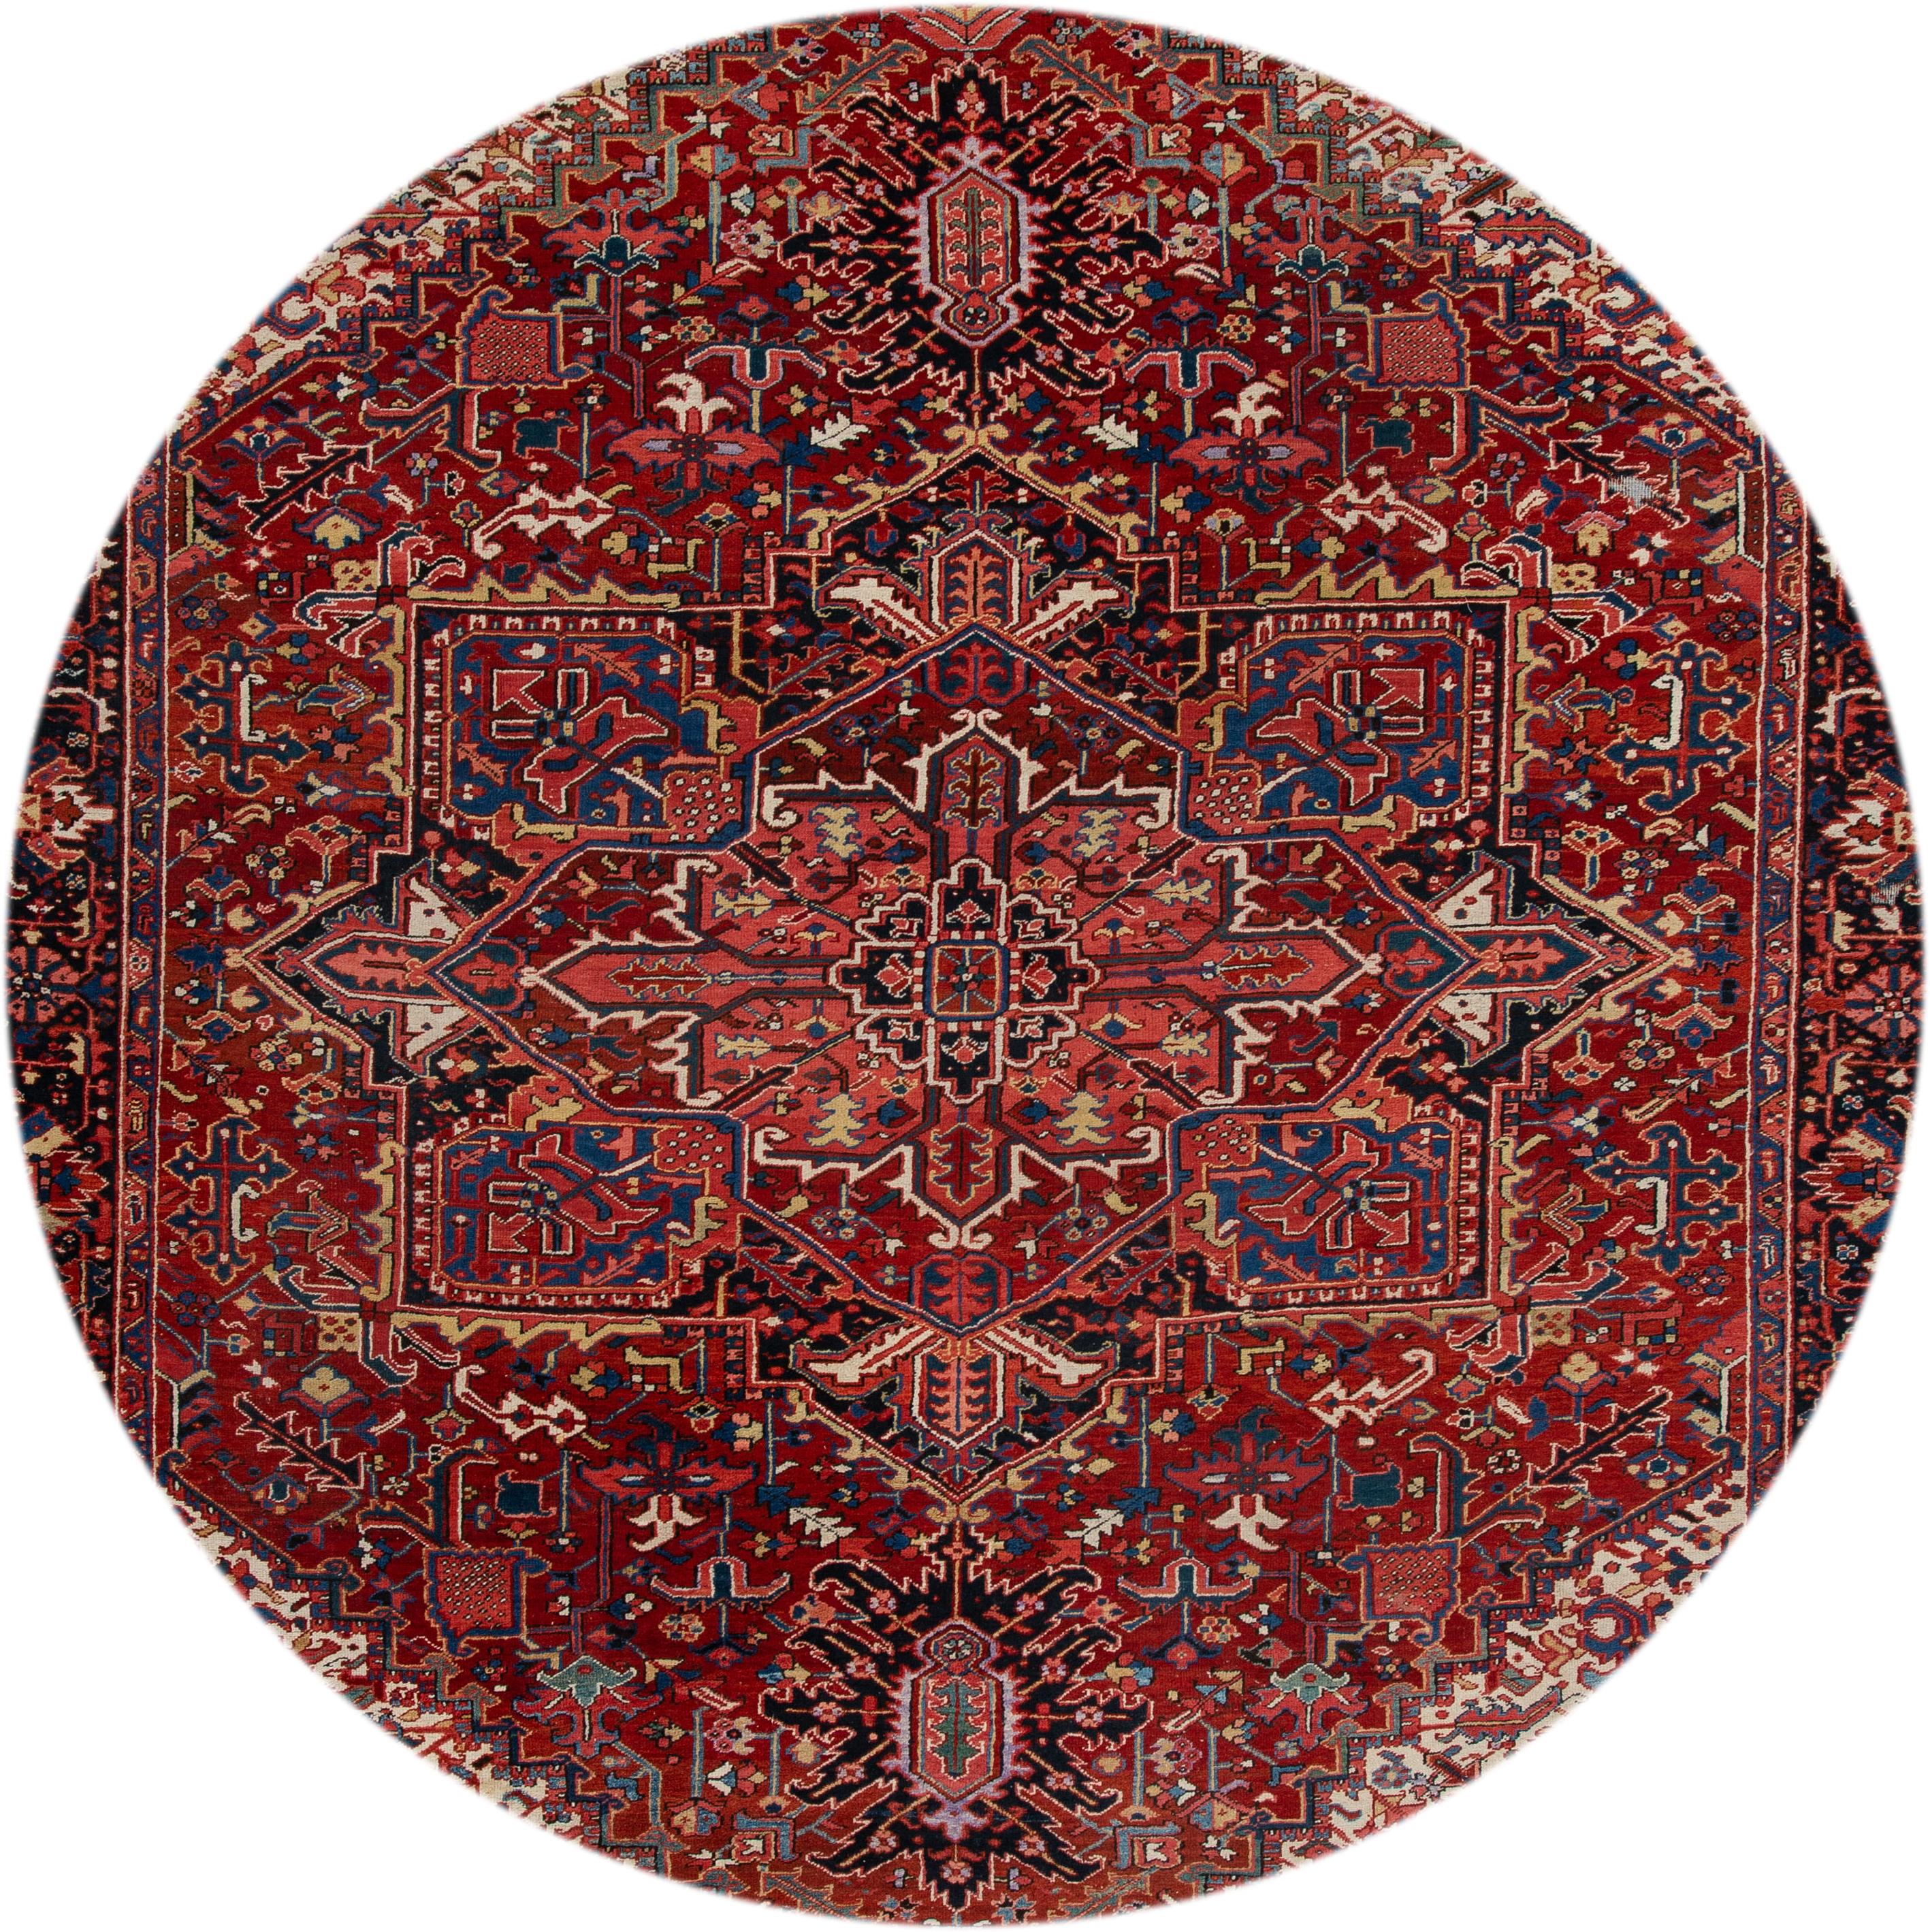 Beautiful antique Heriz hand-knotted wool rug with a red field. This Persian rug has ivory and blue accents in an allover center medallion design,
circa 1920
This rug measures 11' x 14'.